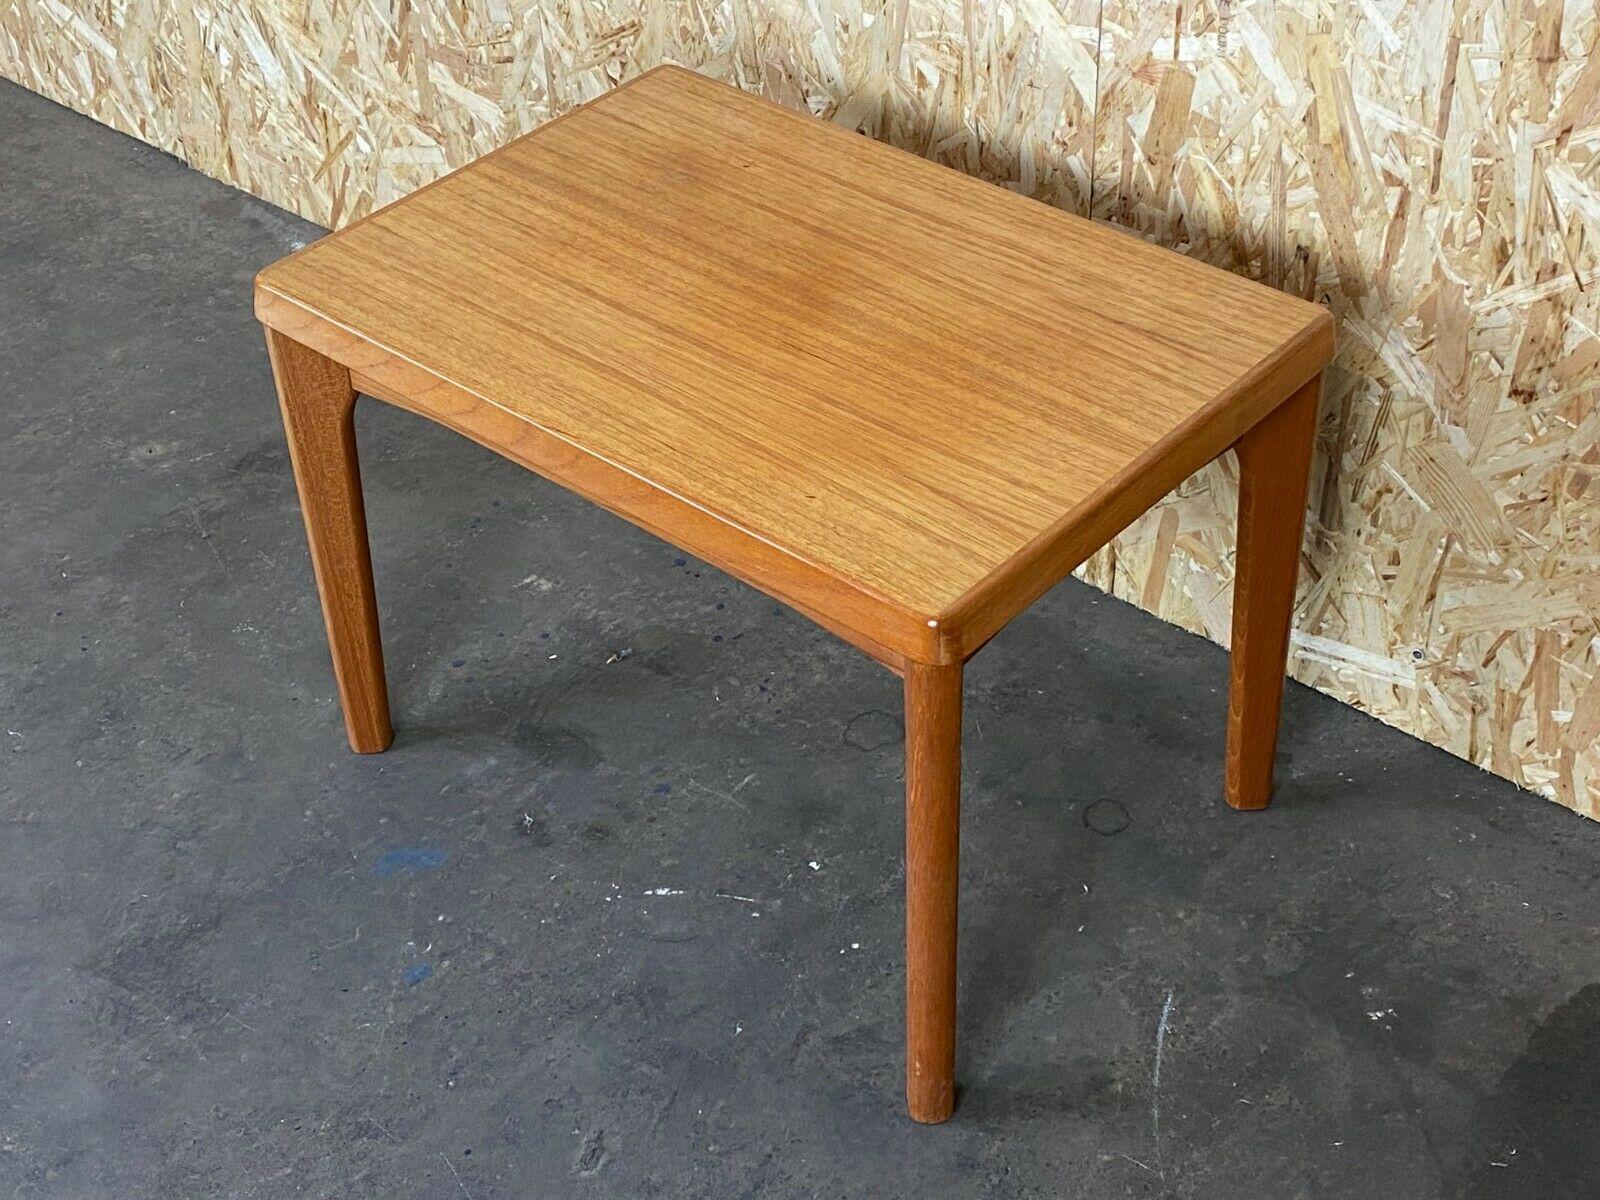 60s 70s teak table coffee table coffee table Henning Kjaernulf Design 70s

Object: coffee table / side table

Manufacturer:

Condition: good

Age: around 1960-1970

Dimensions:

64.5cm x 45cm x 50.5cm

Other notes:

The pictures